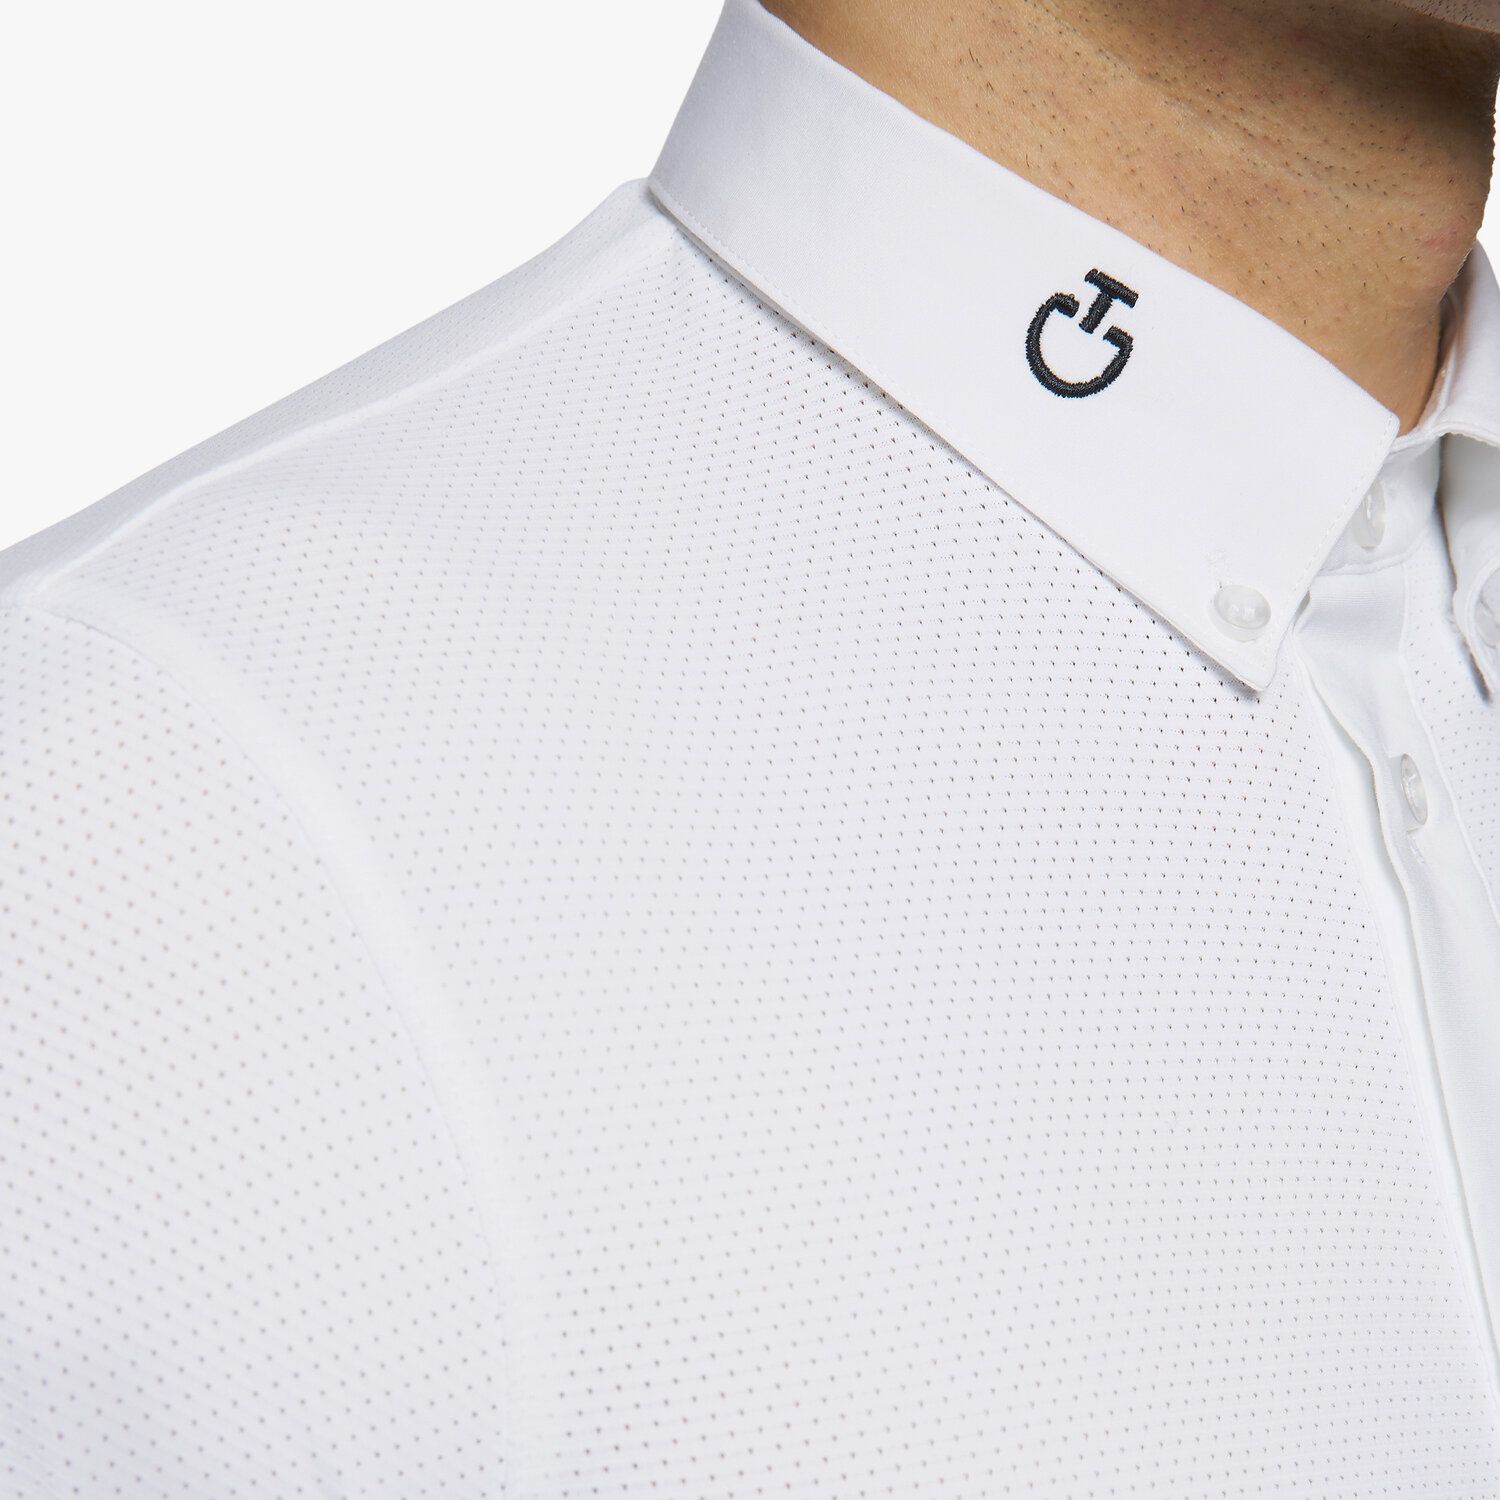 Cavalleria Toscana FISE competition shirt WHITE-4